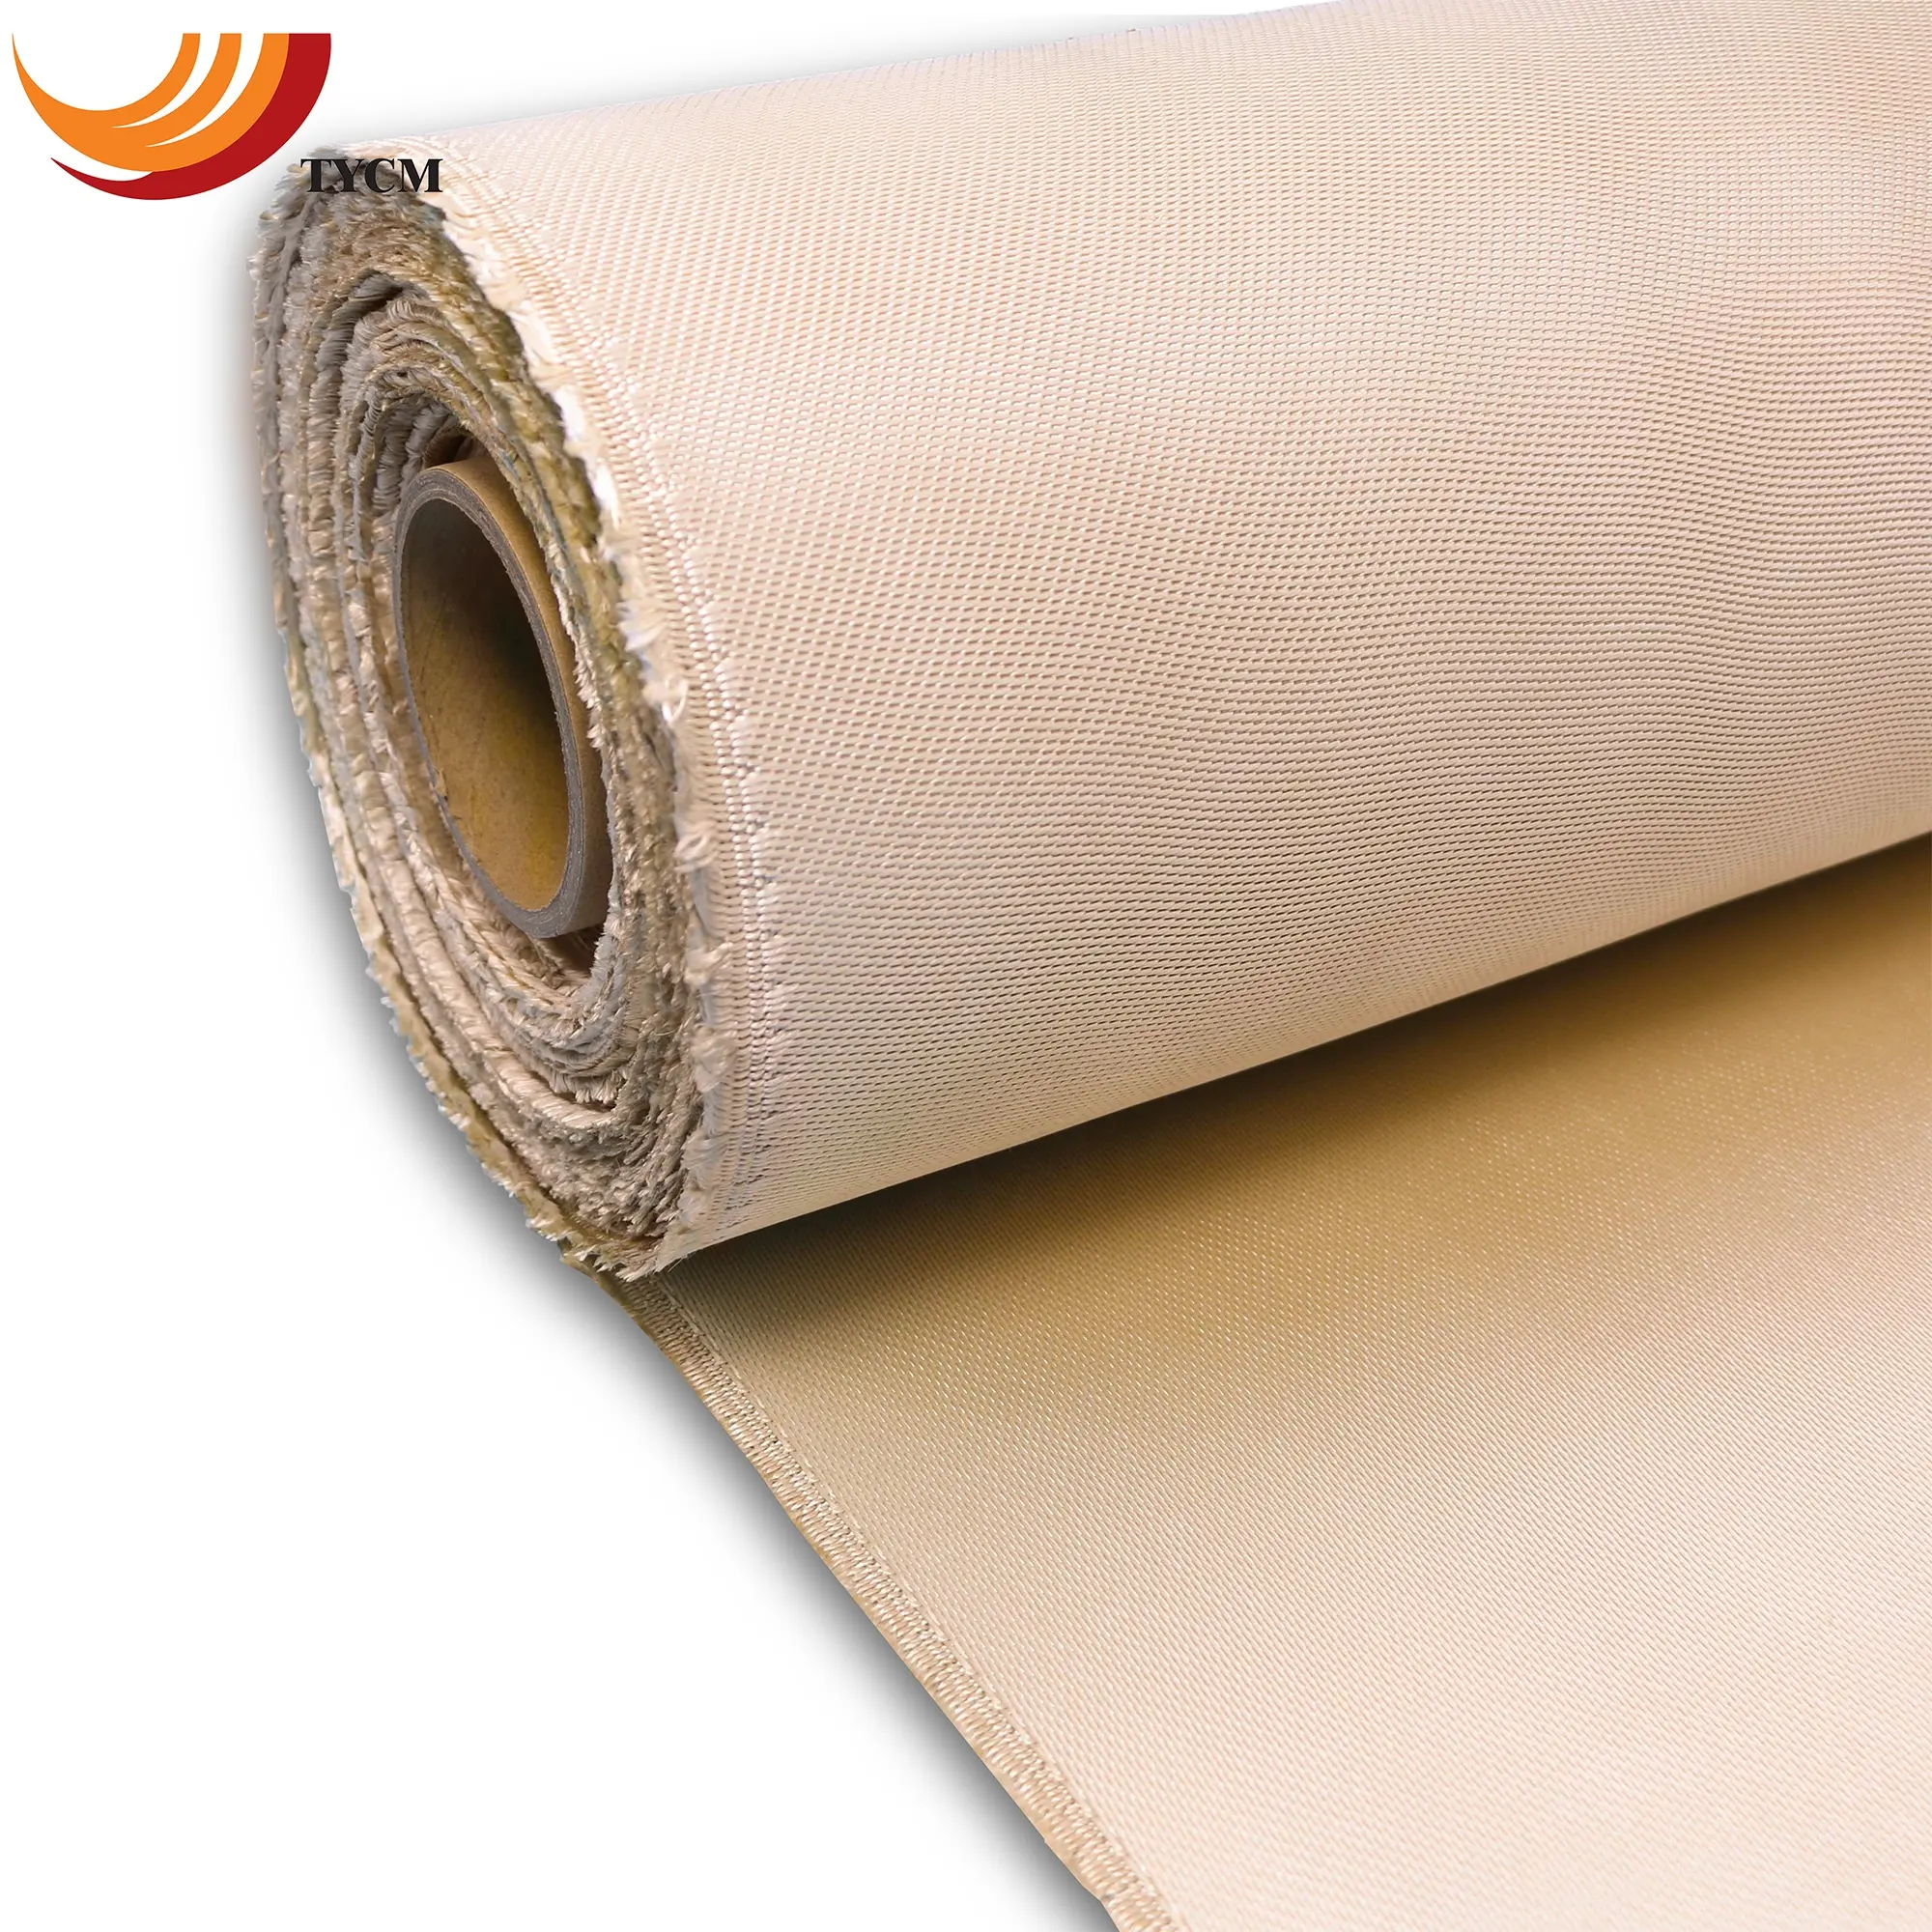 Professional Good Material Low Price High-silica Fabric For Welding Protection And Extreme Temperatures